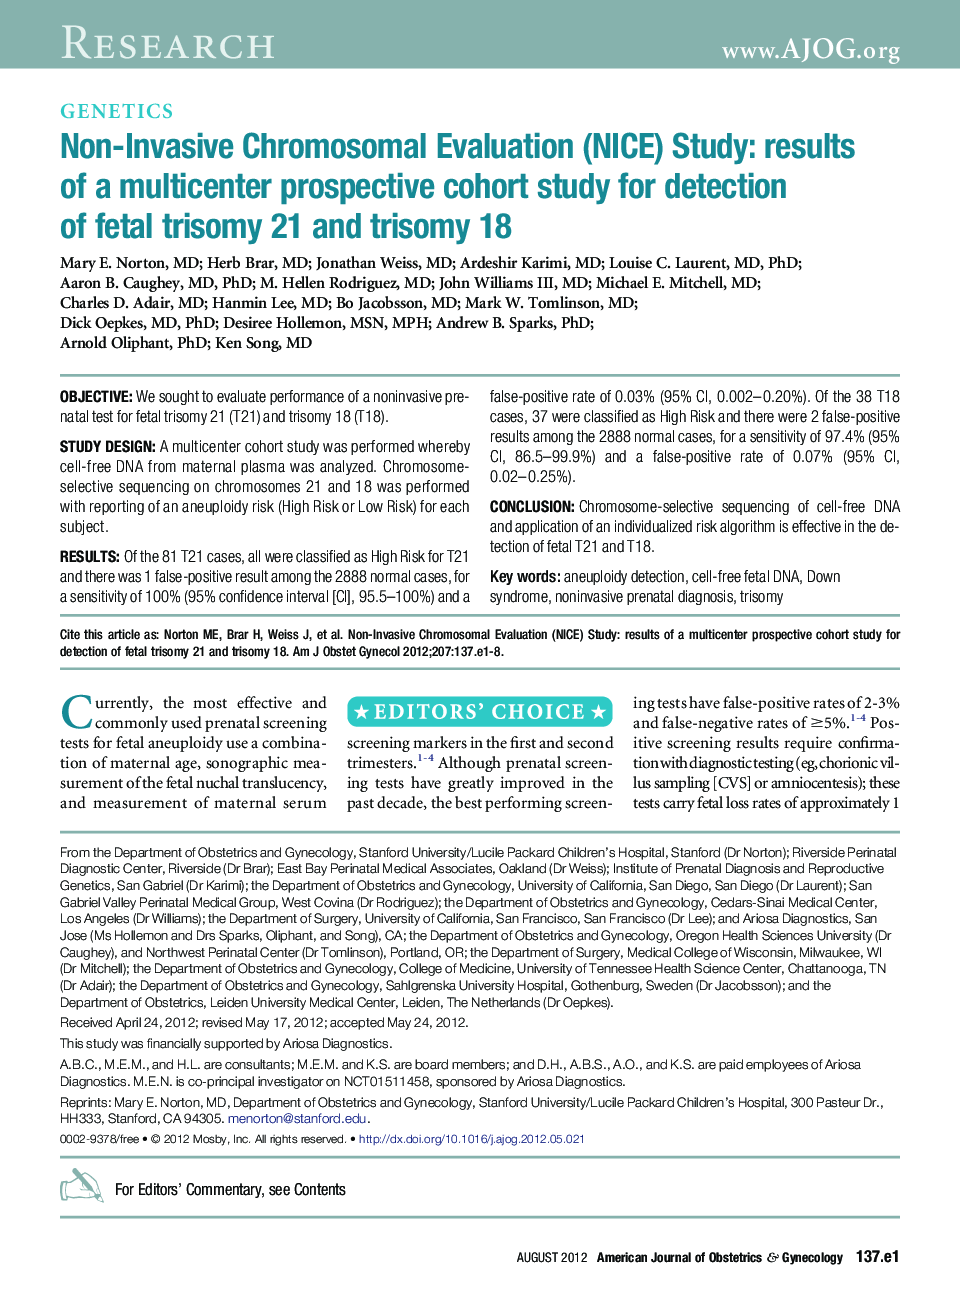 Non-Invasive Chromosomal Evaluation (NICE) Study: results of a multicenter prospective cohort study for detection of fetal trisomy 21 and trisomy 18